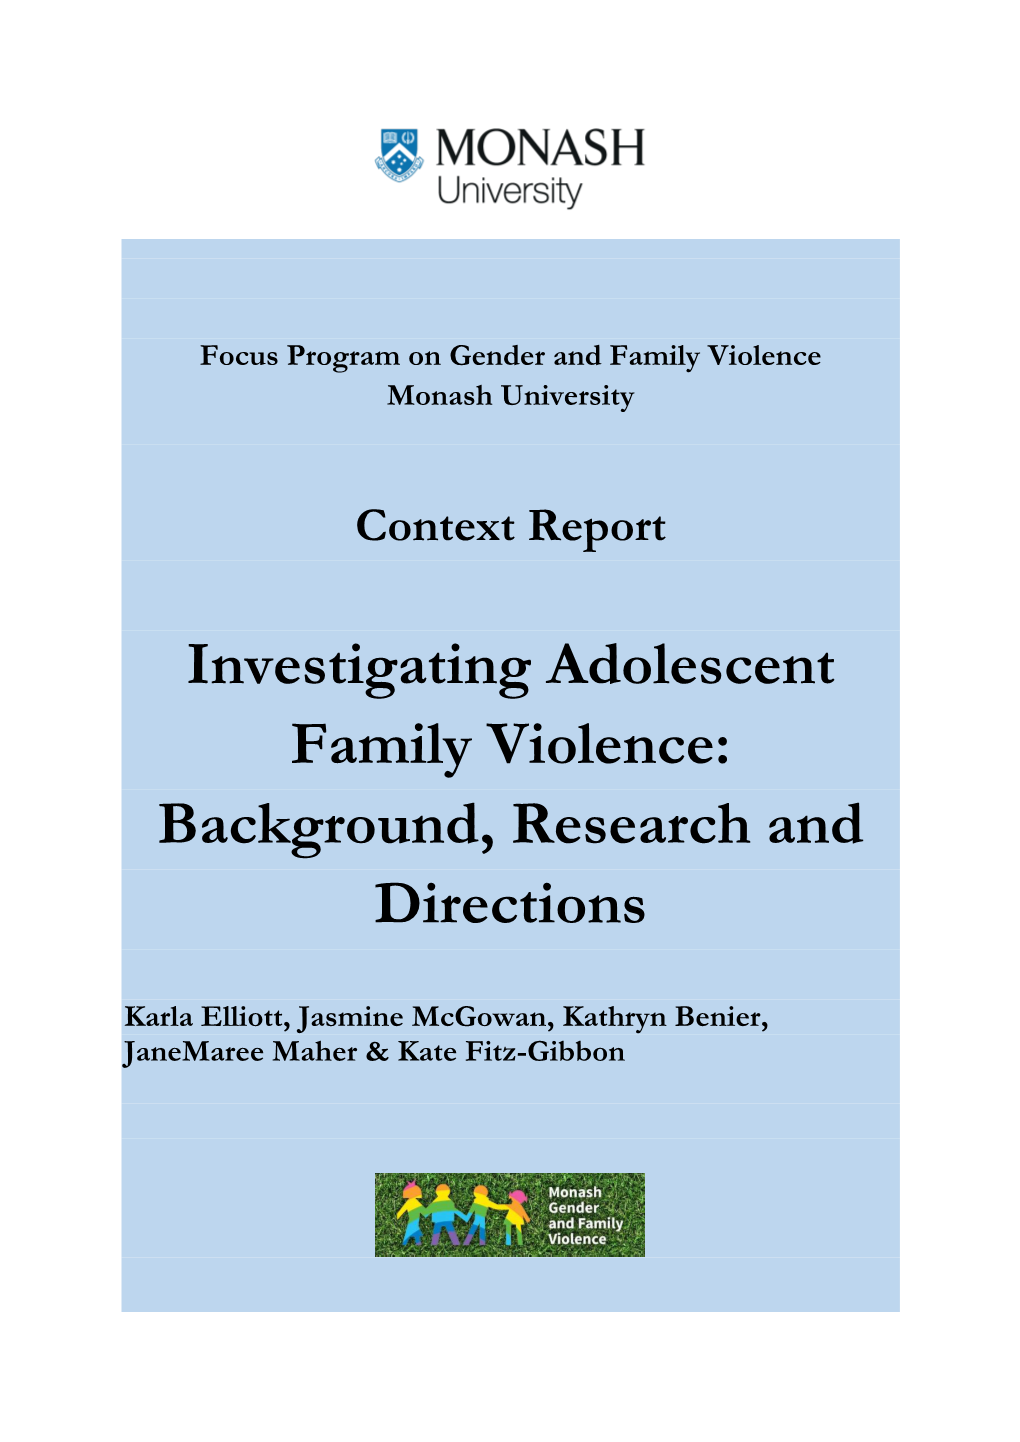 Investigating Adolescent Family Violence: Background, Research and Directions